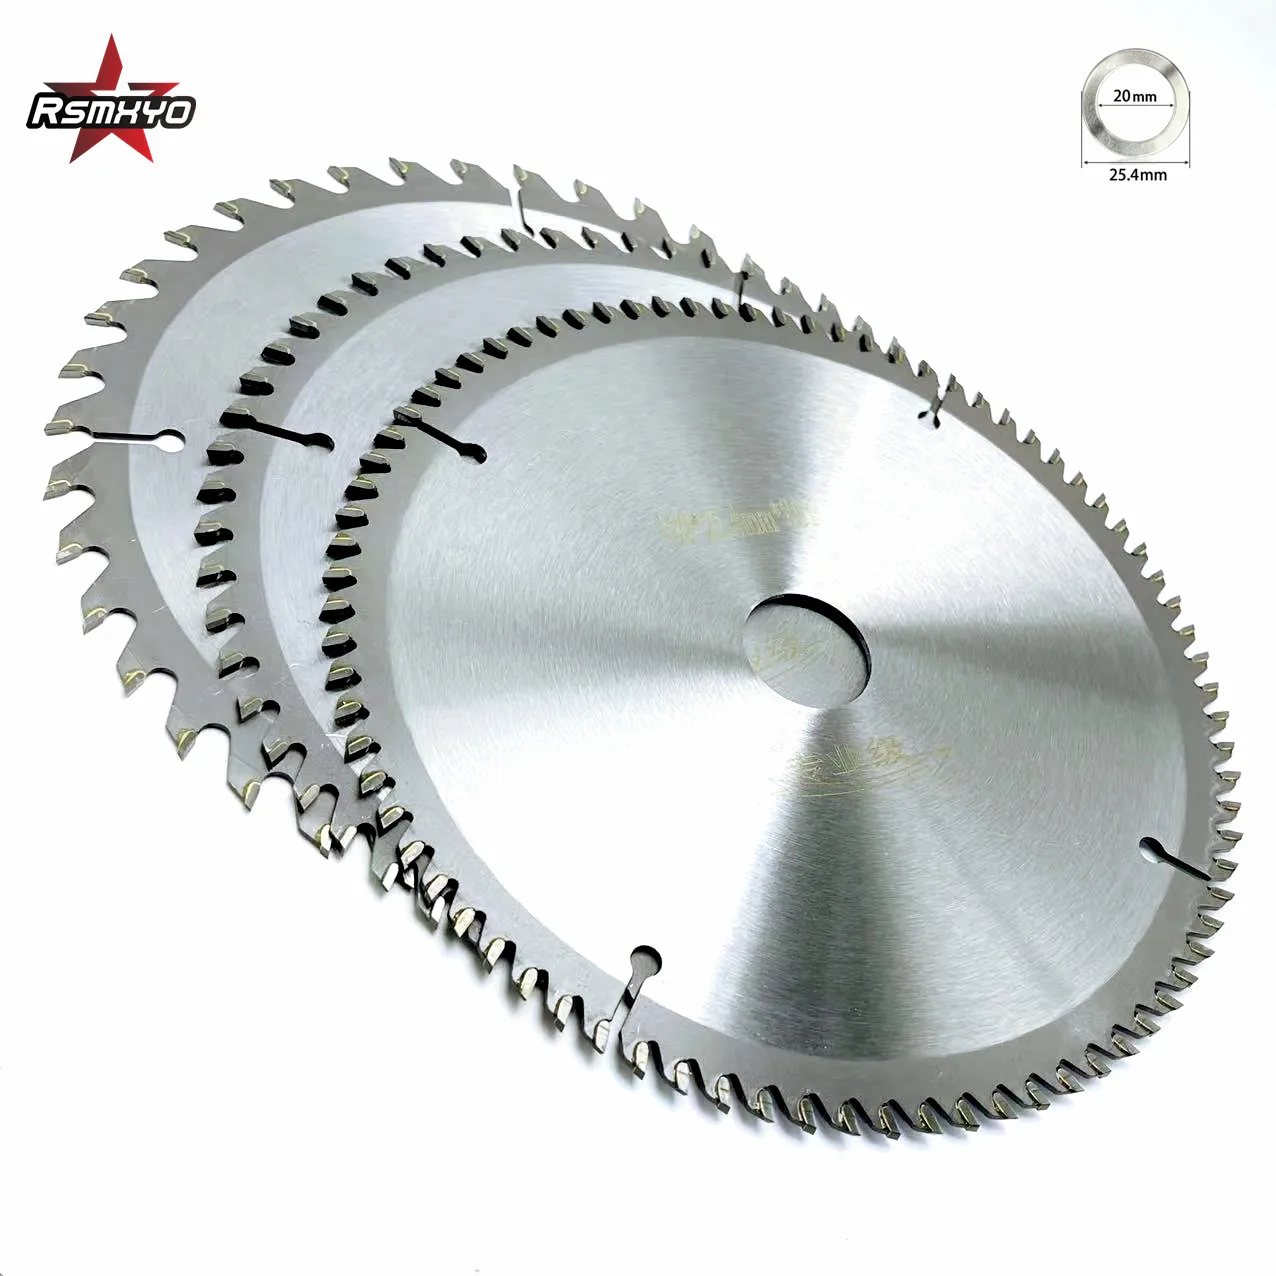 

RSMXYO 180x25.4mm TCT Cutting Disc Circular Saw Blade Multipurpose For Wood 40T 60T 80T Carbide Tip Woodworking Saw Blade